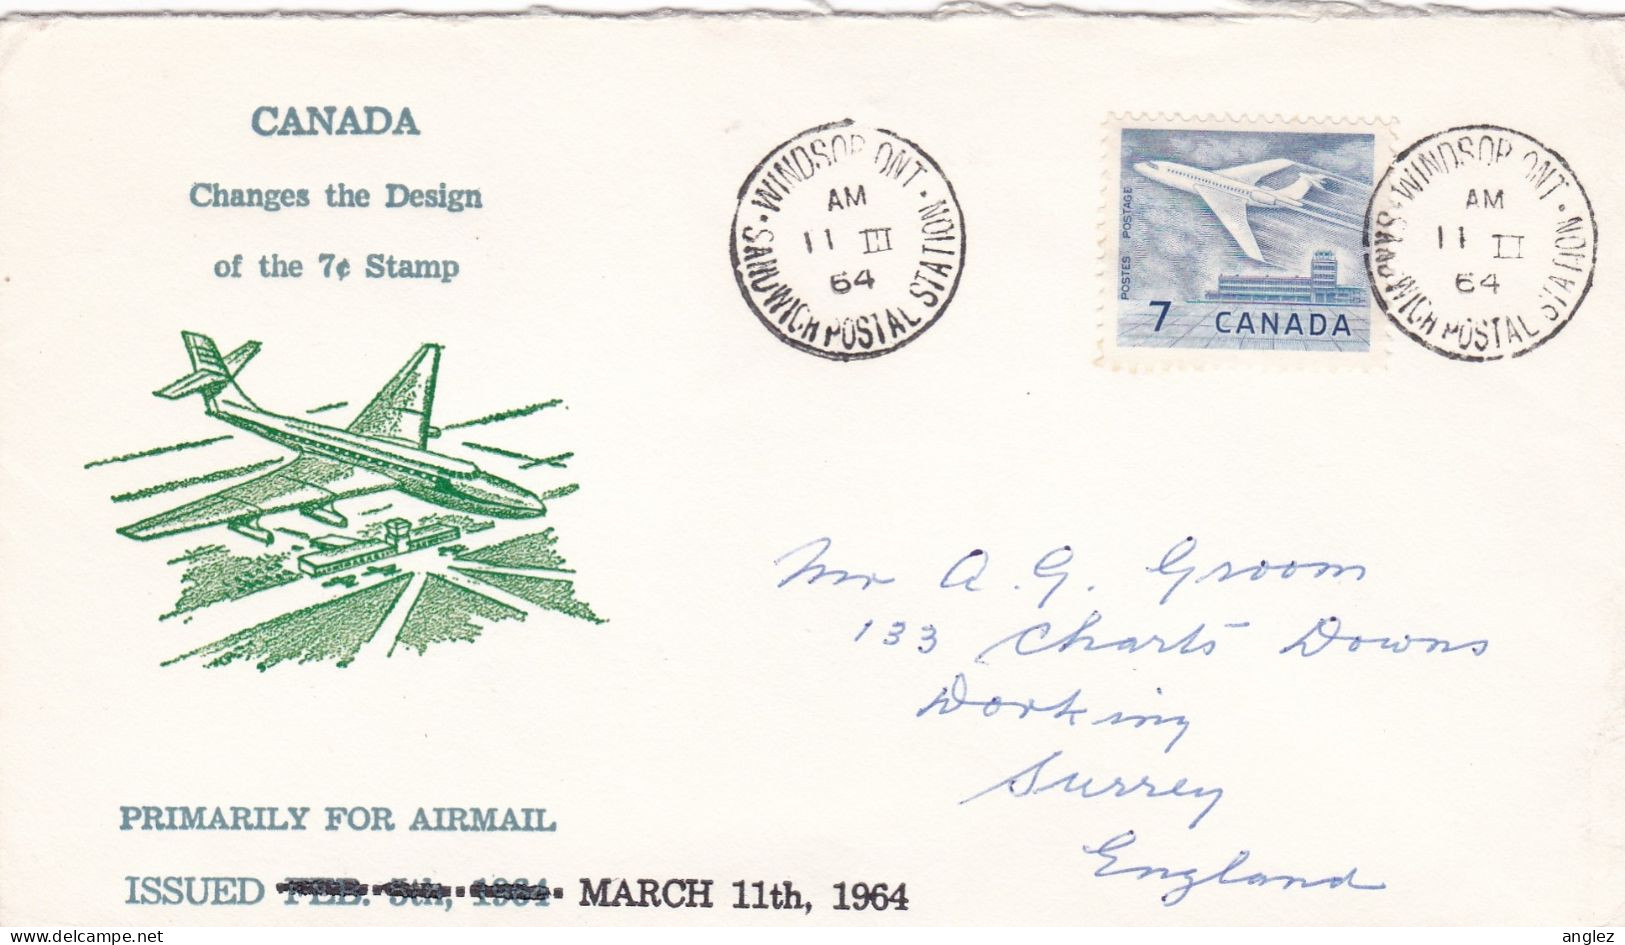 Canada - 1964 7c Airmail Stamp Changed Design Illustrated FDC - Charity Seal - Luchtpost